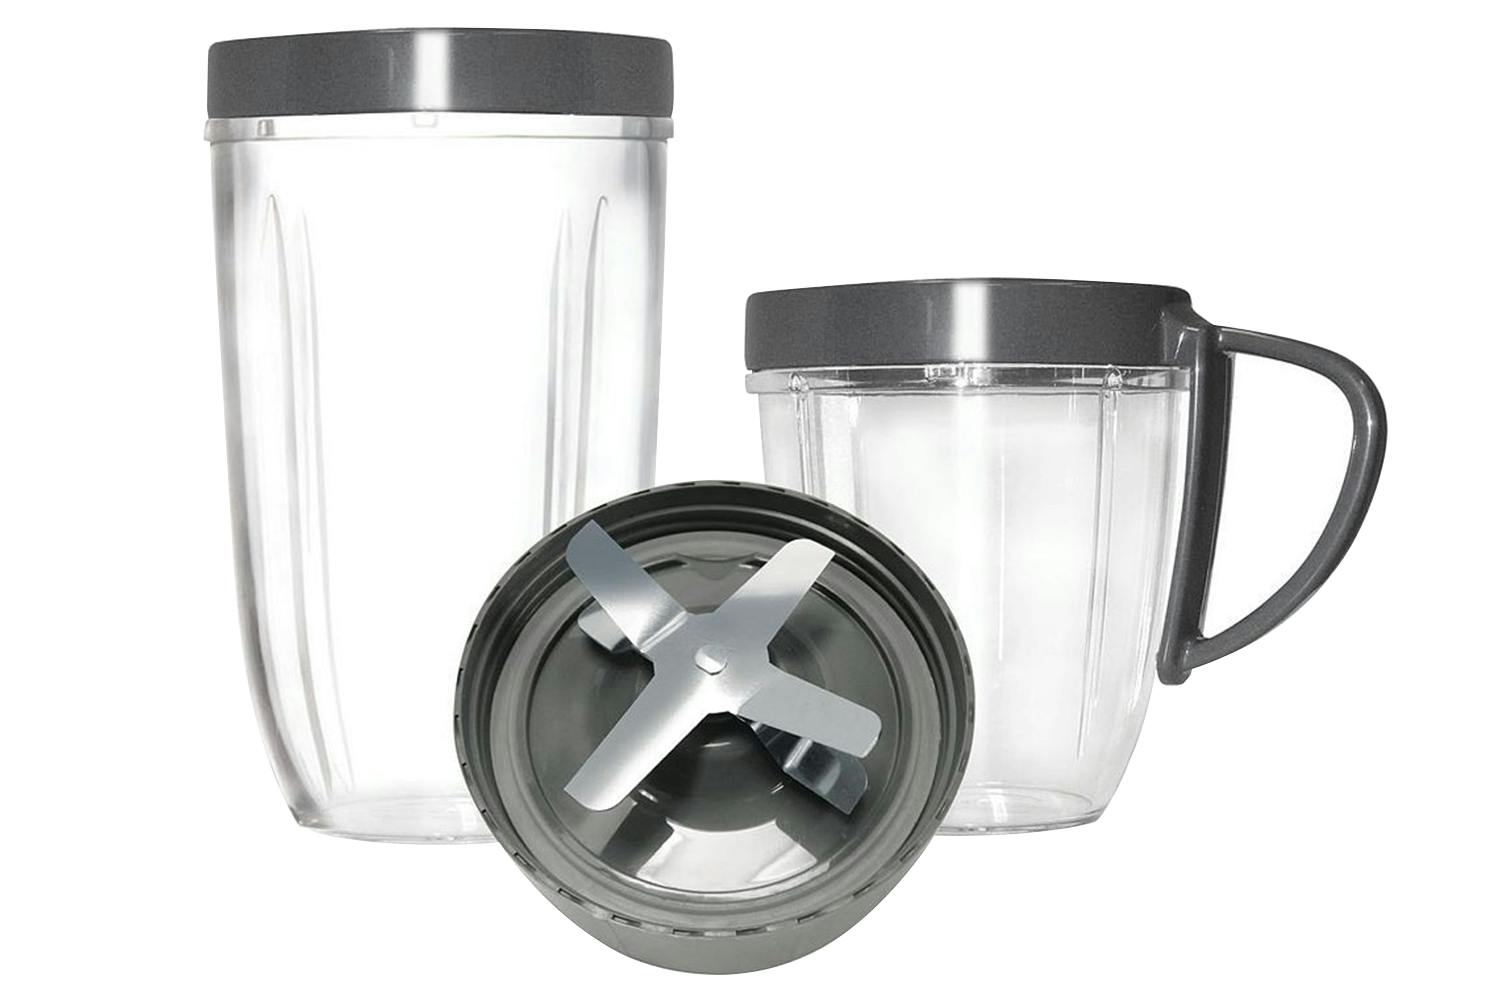 NutriBullet Replacement Blade & Cup Kit